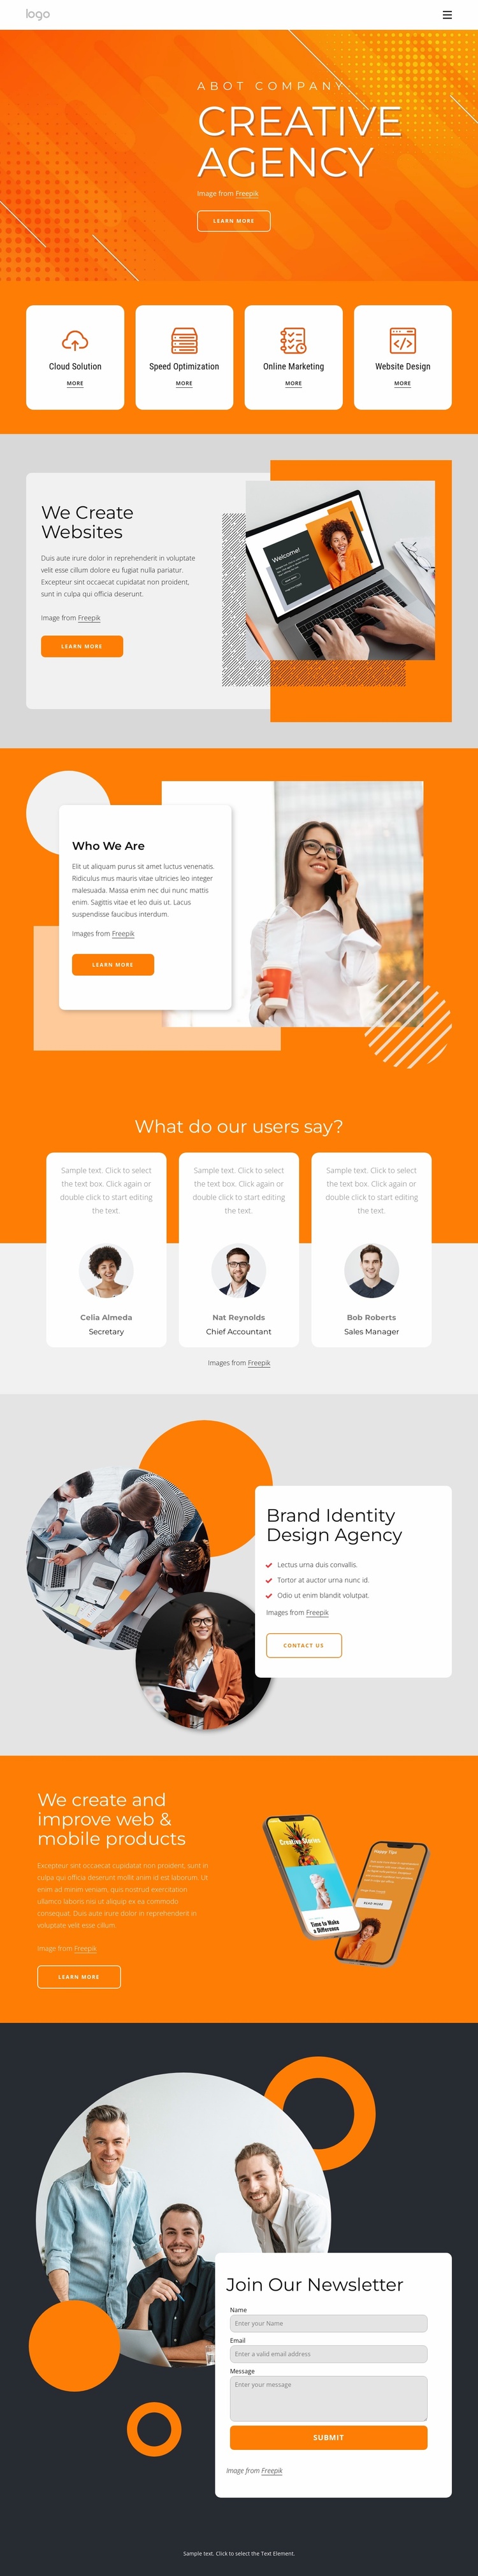 The creative agency for your next big thing Website Template